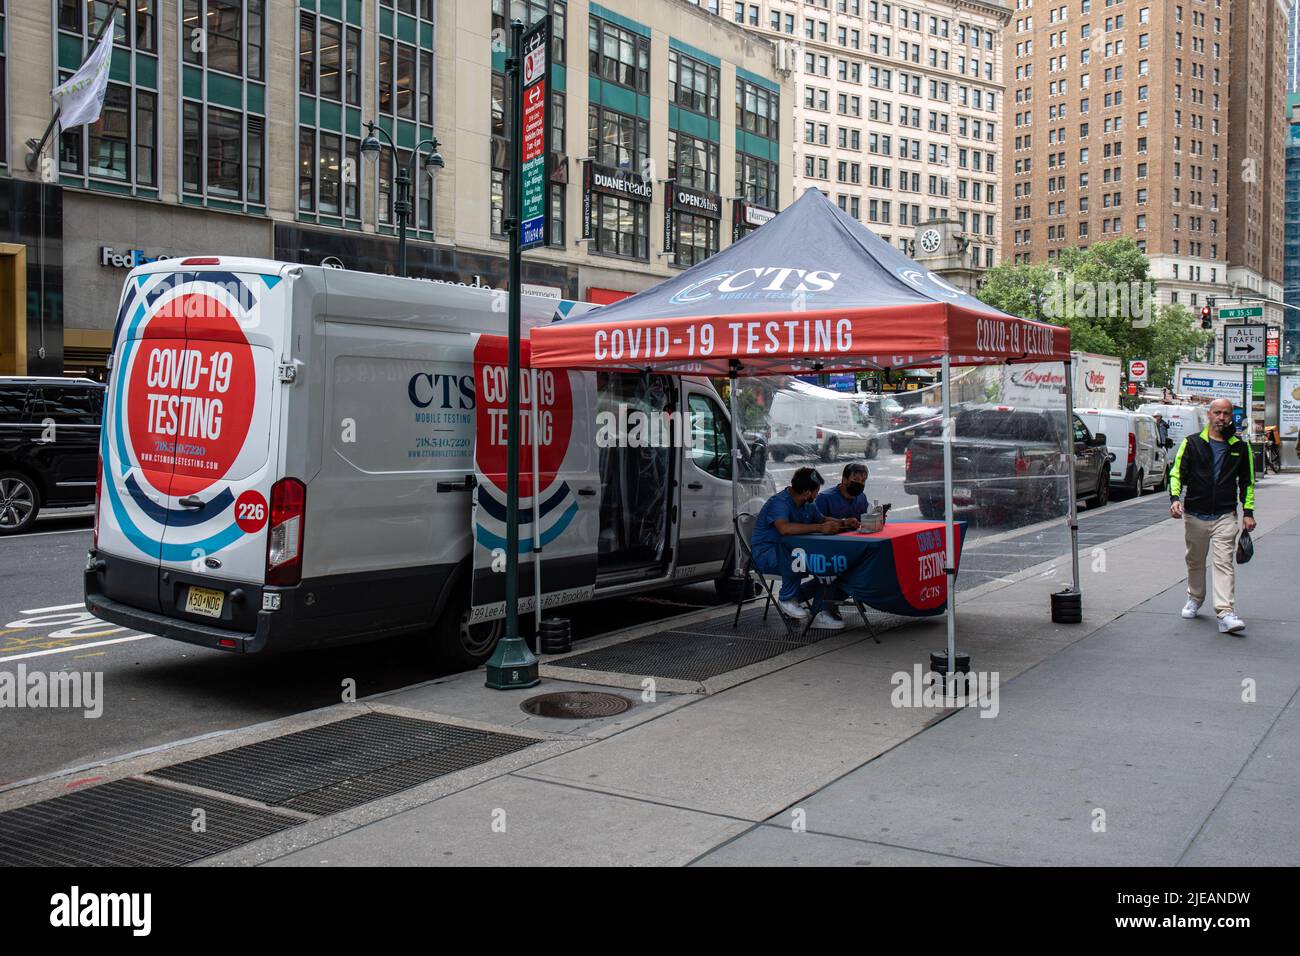 CTS Covid-19 mobile testing unit in Midtown Manhattan, New York City, United States of America Stock Photo